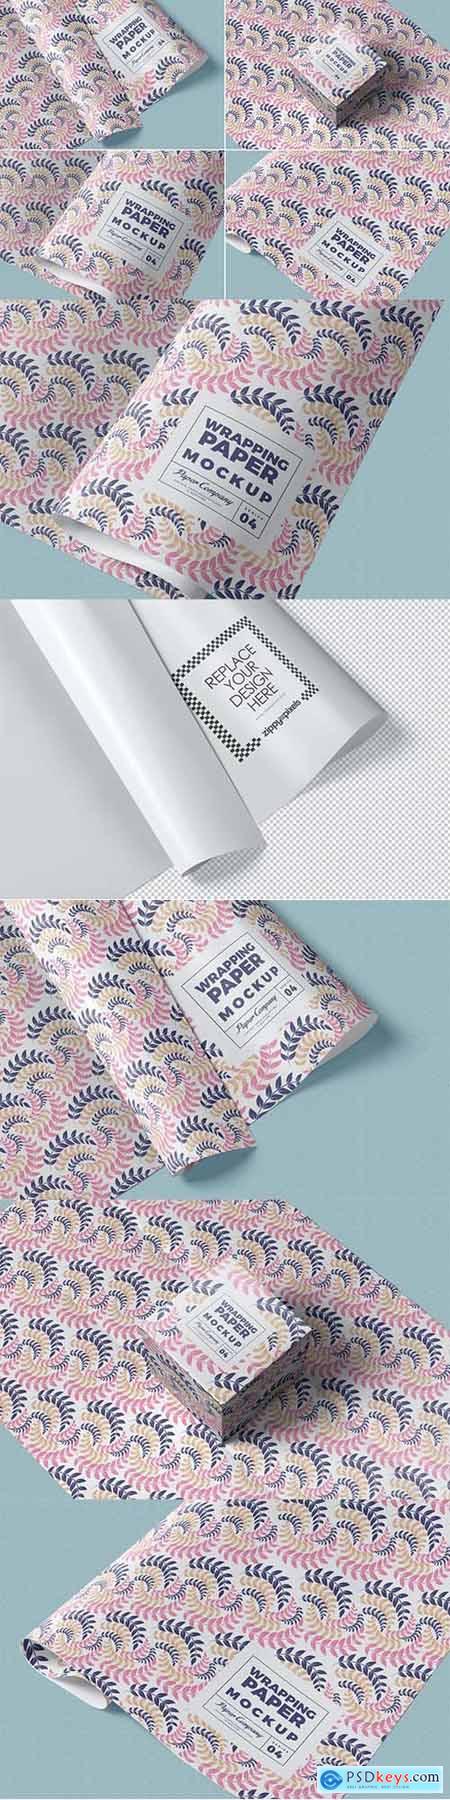 Wrapping Paper Mockups